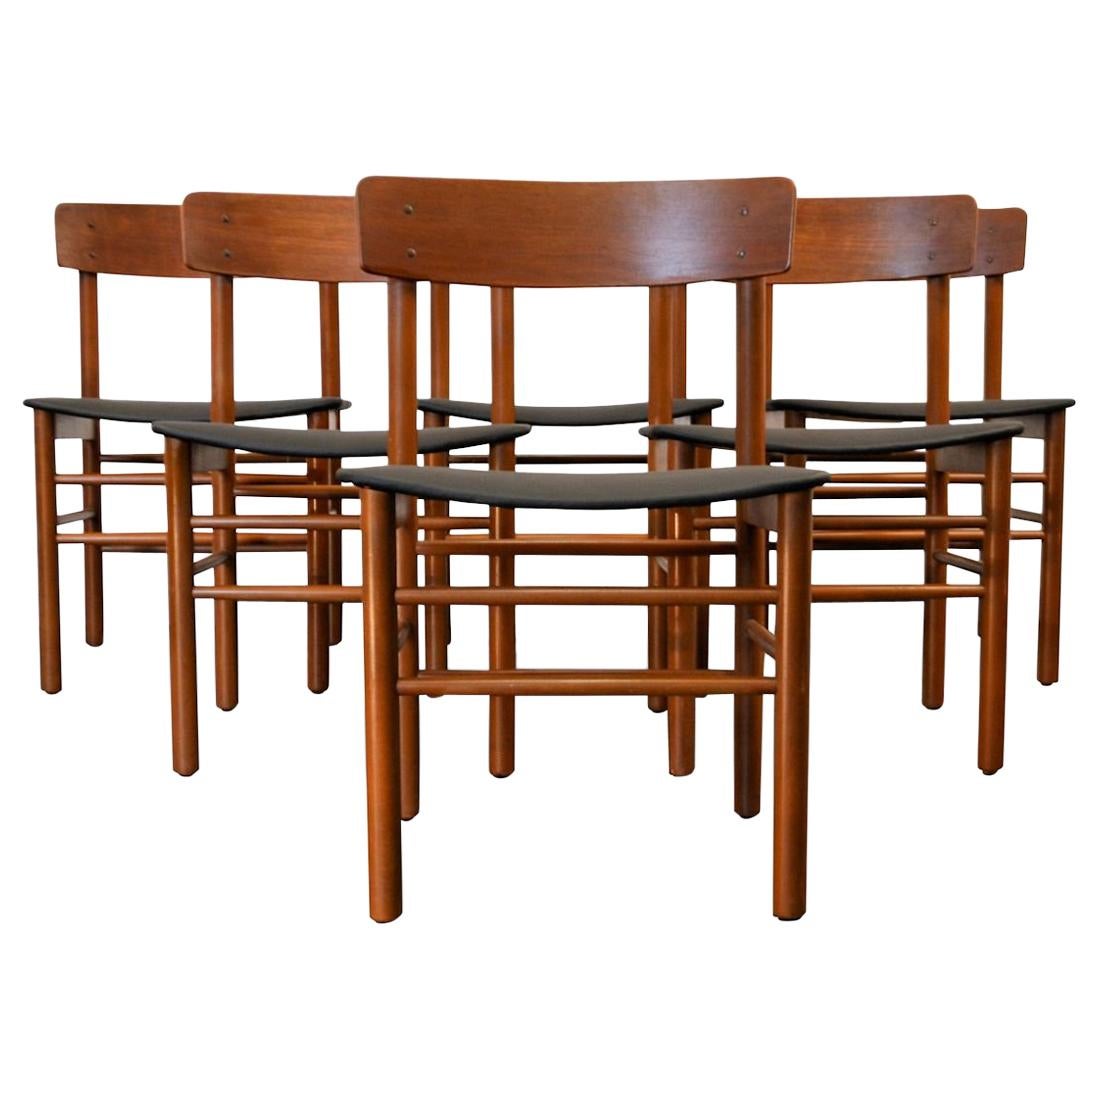 Set of 6 Midcentury Farstrup Teak / Beech Dining Chairs For Sale